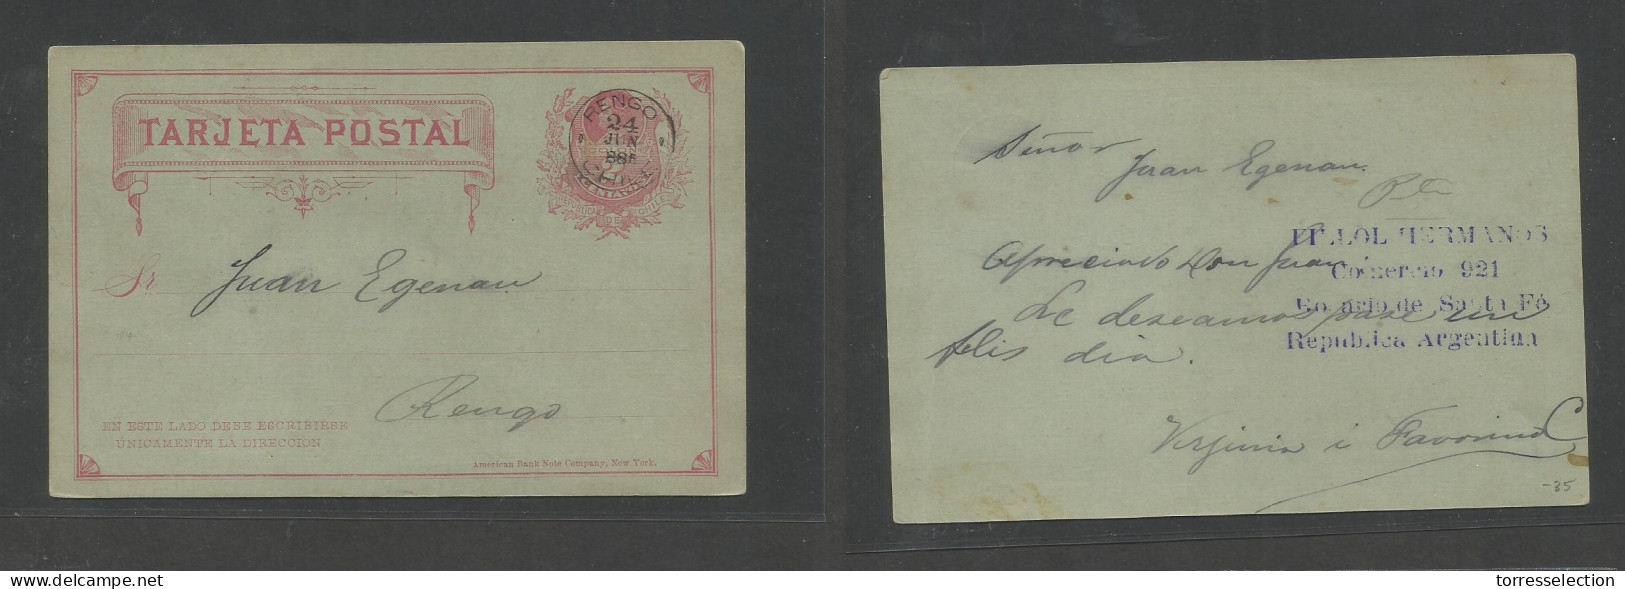 CHILE - Stationery. 1885 (24 June) Rengo Local Early Stat Card. 2c Red / Greenish. Scarce Small Cds + Town Origin. Fillo - Cile